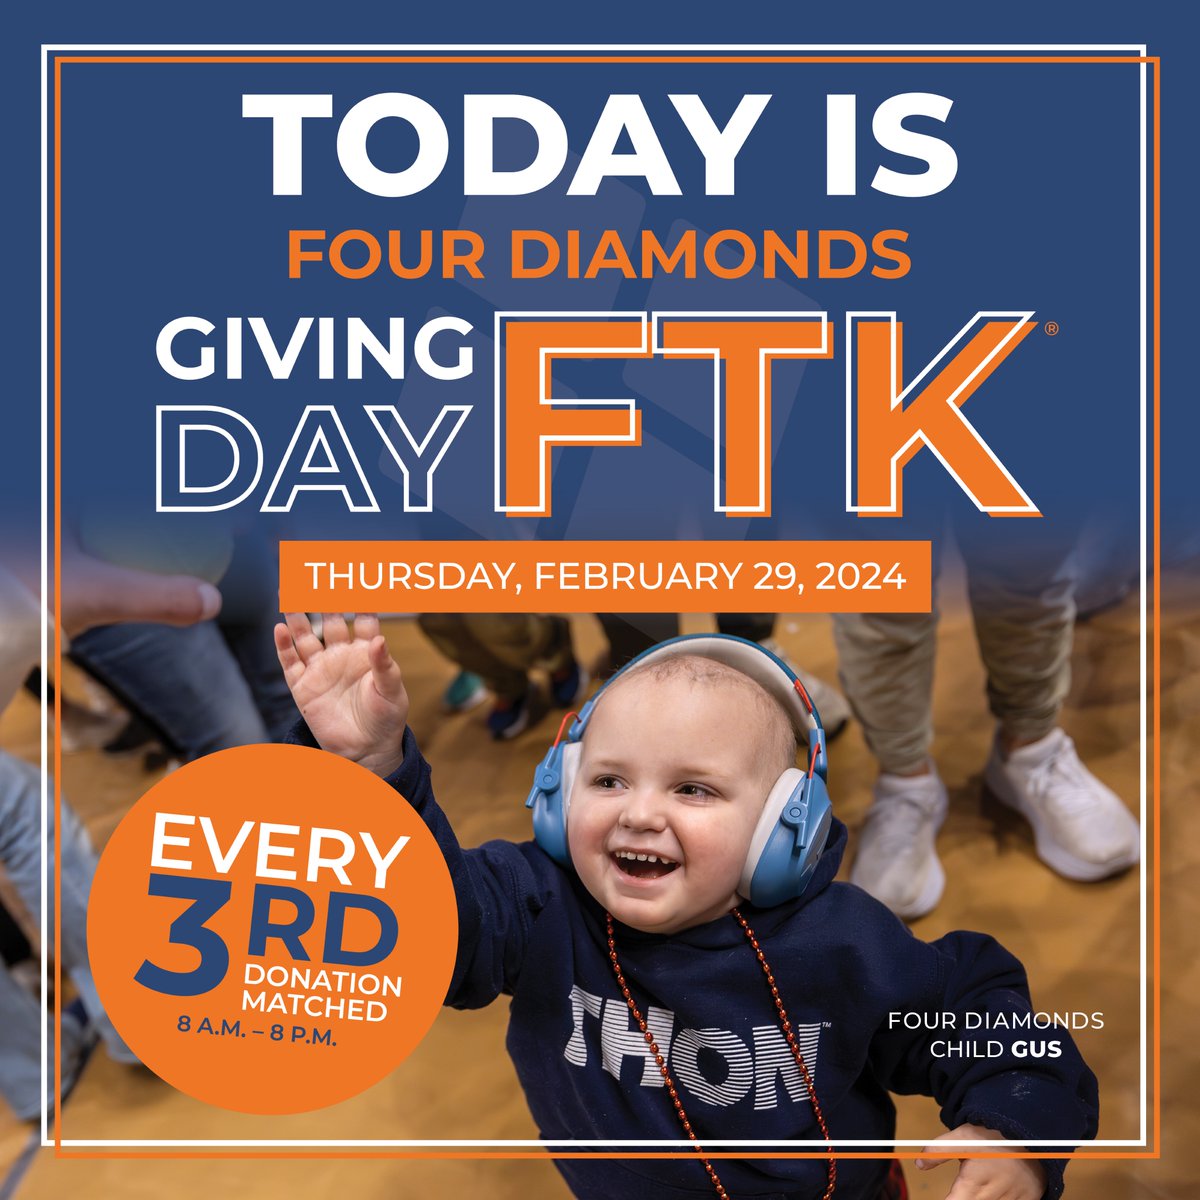 Today is Giving Day FTK®! LEAP INTO ACTION and help #ConquerChildhoodCancer by making a gift to Four Diamonds! 🐸 Donations received today on DonorDrive between 8 a.m. – 8 p.m. will be matched thanks to @MIWindows1947! Donate now ➡️ bit.ly/GivingDayFTK24